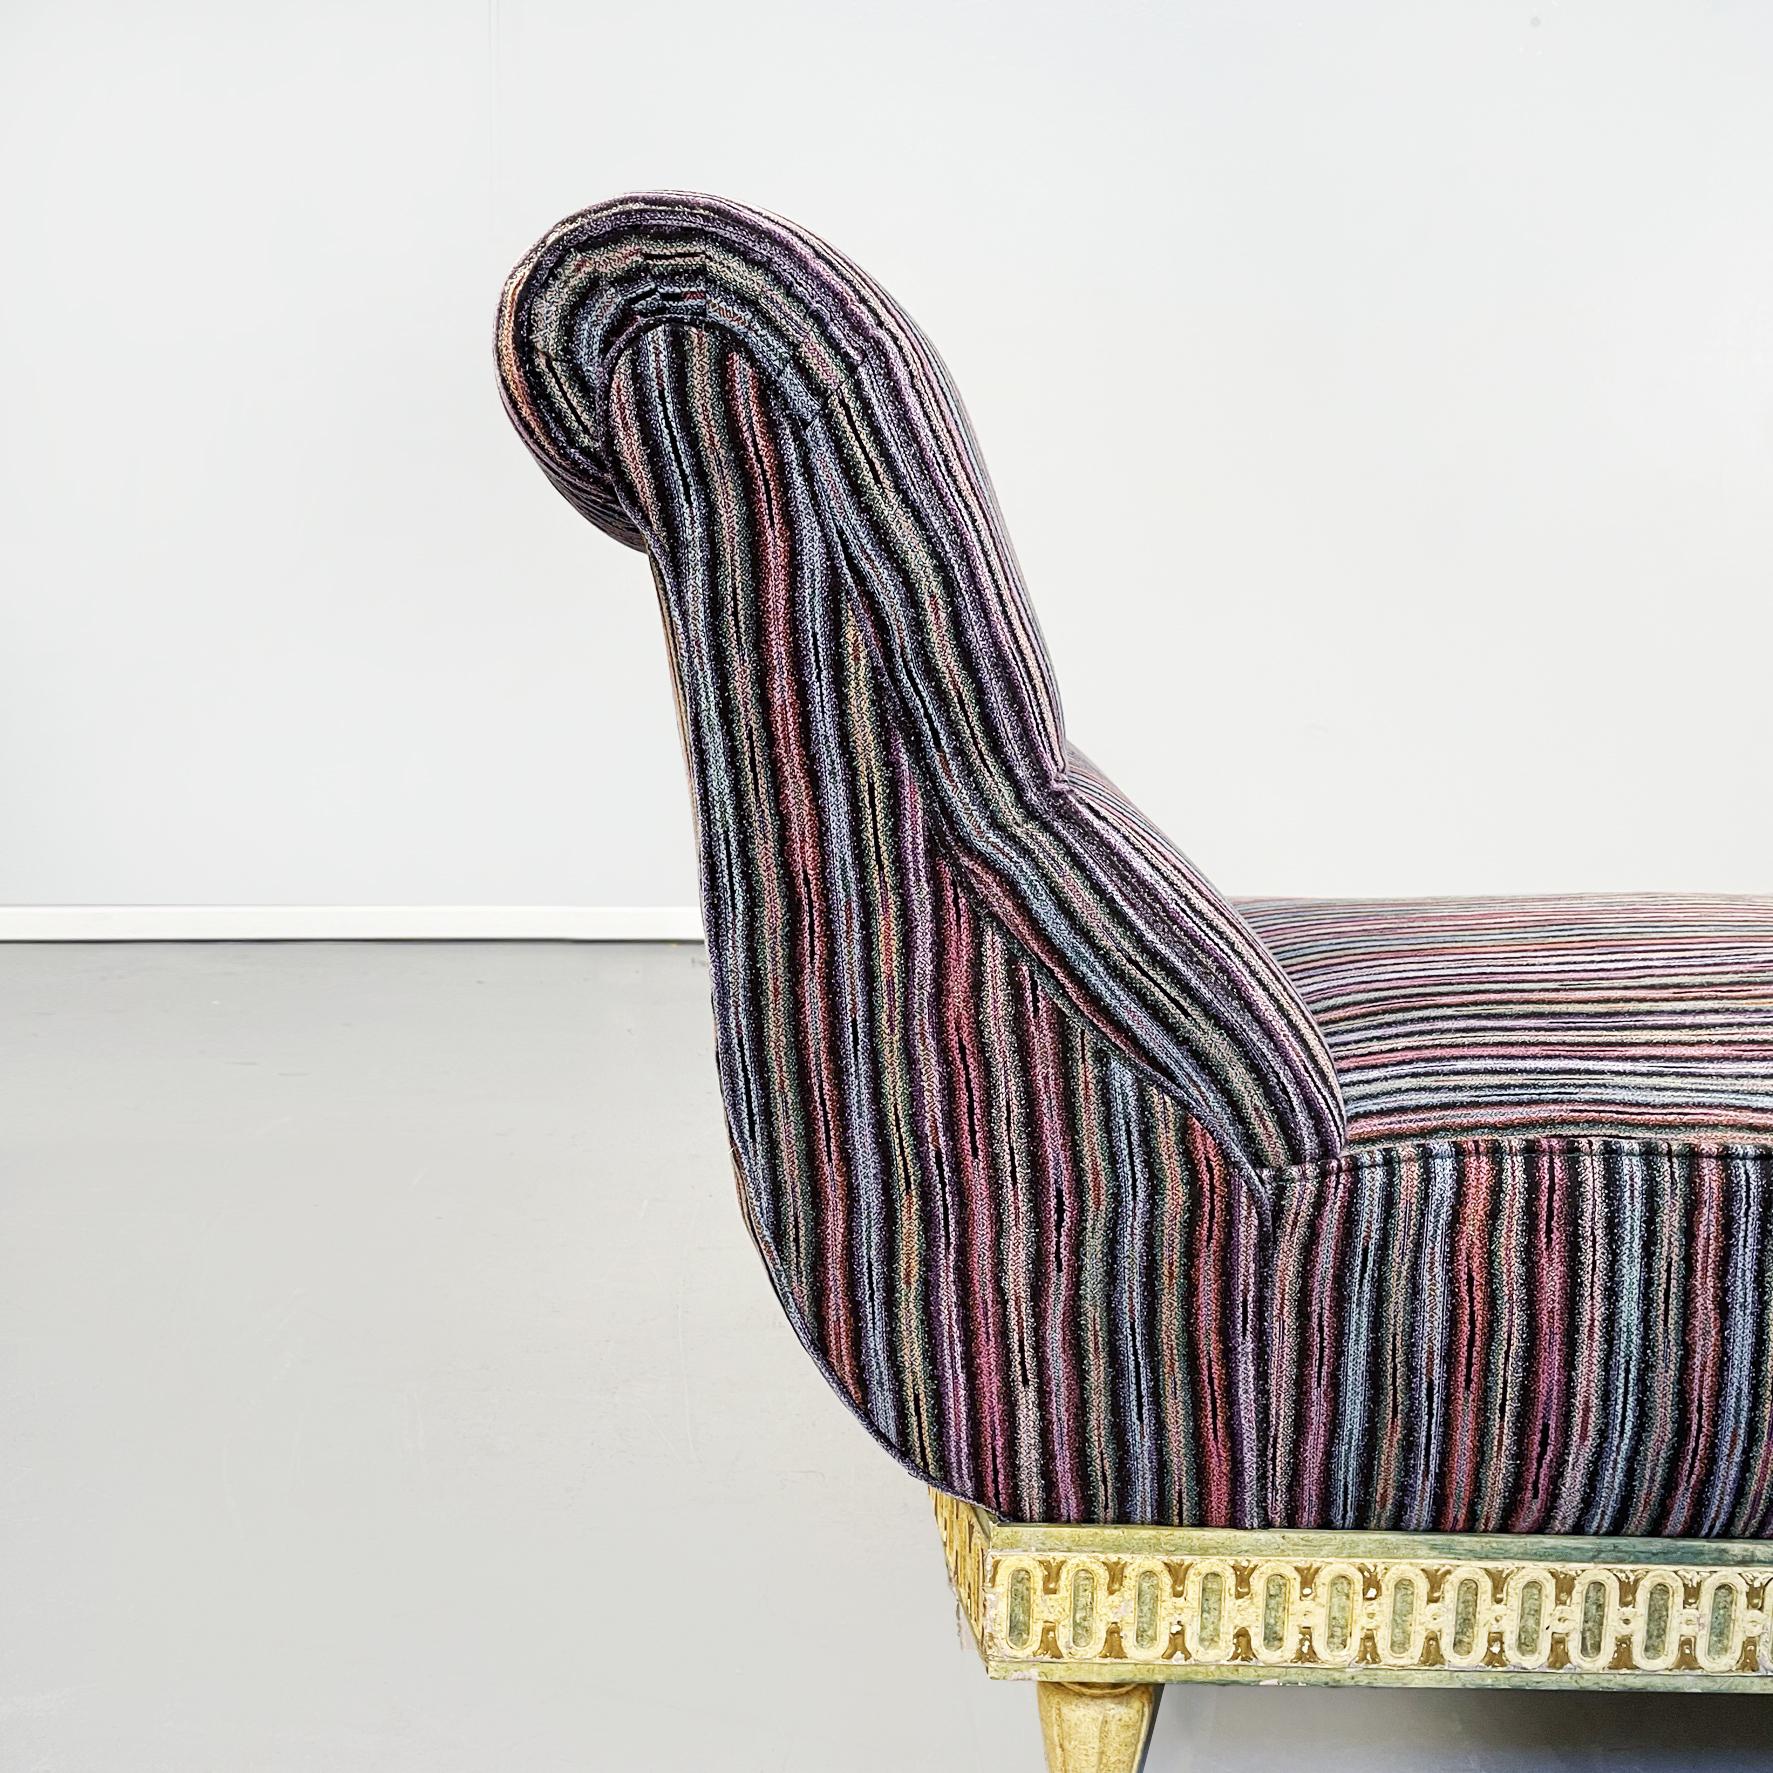 Italian Midcentury Venetian Style Chaise Longue with Missoni Striped Fabric, 1950 For Sale 2